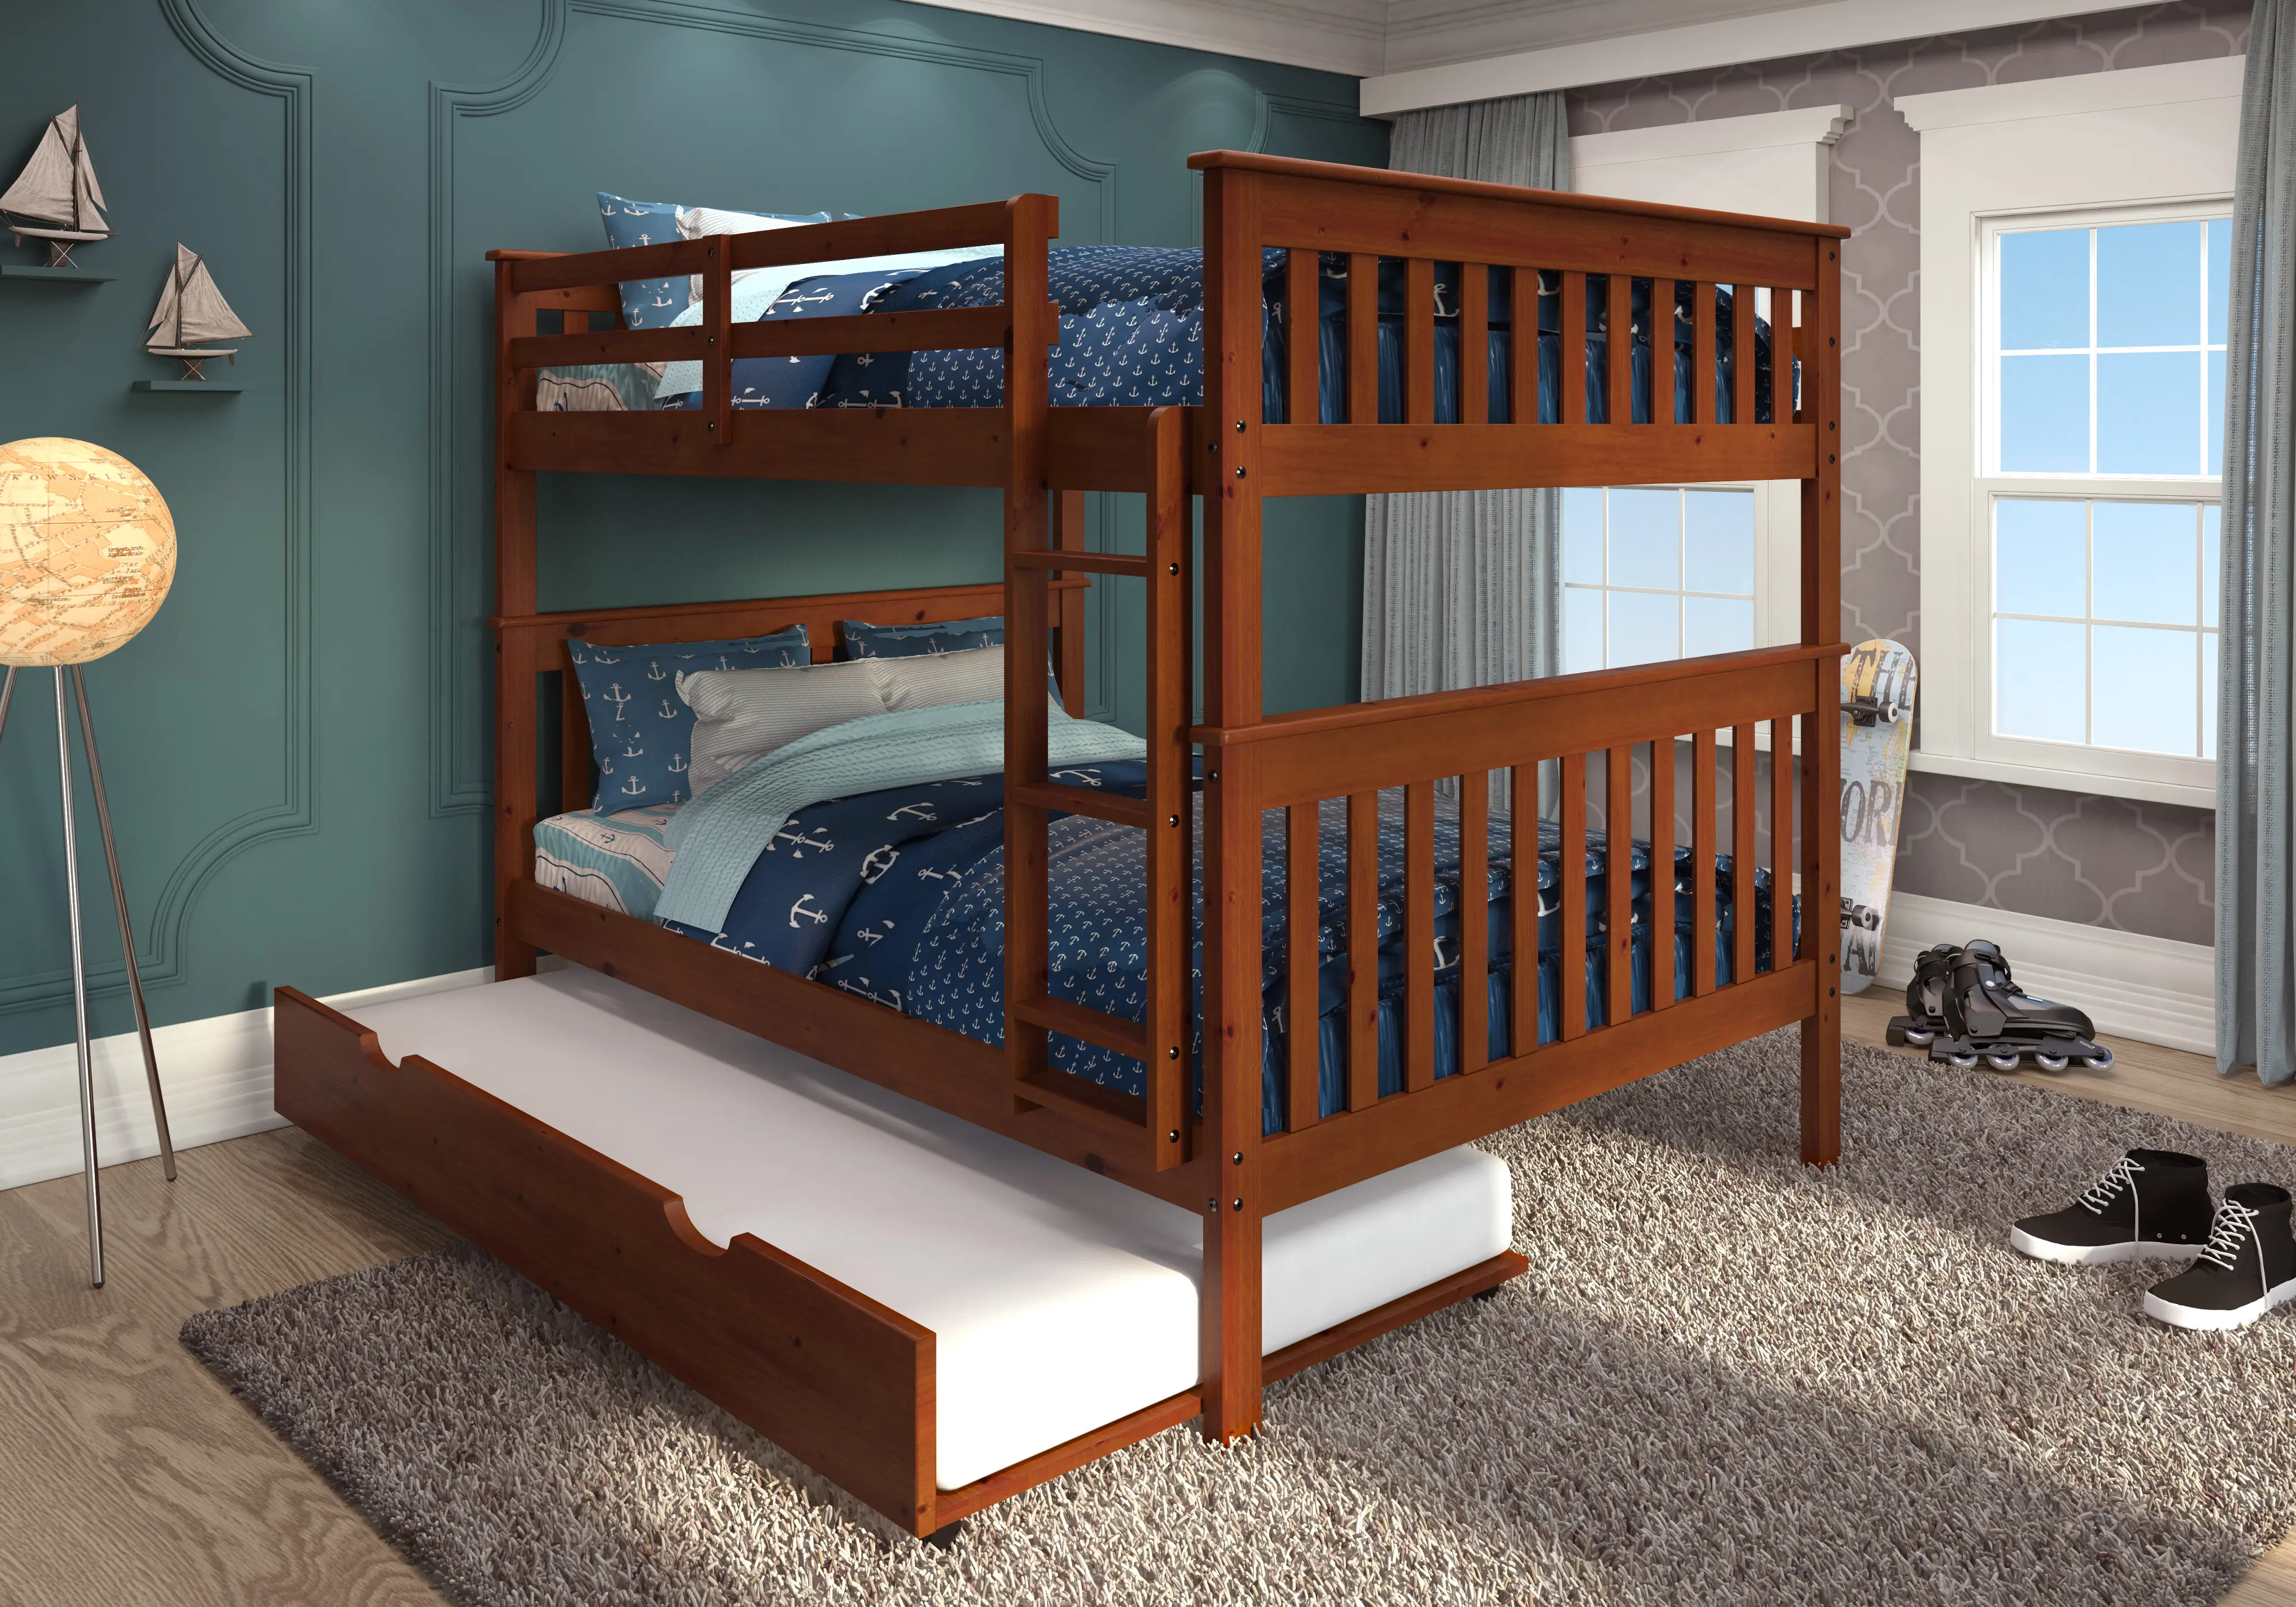 Photos - Bed Donco Trading Craftsman Espresso Brown Full-over-Full Bunk  with Trundl